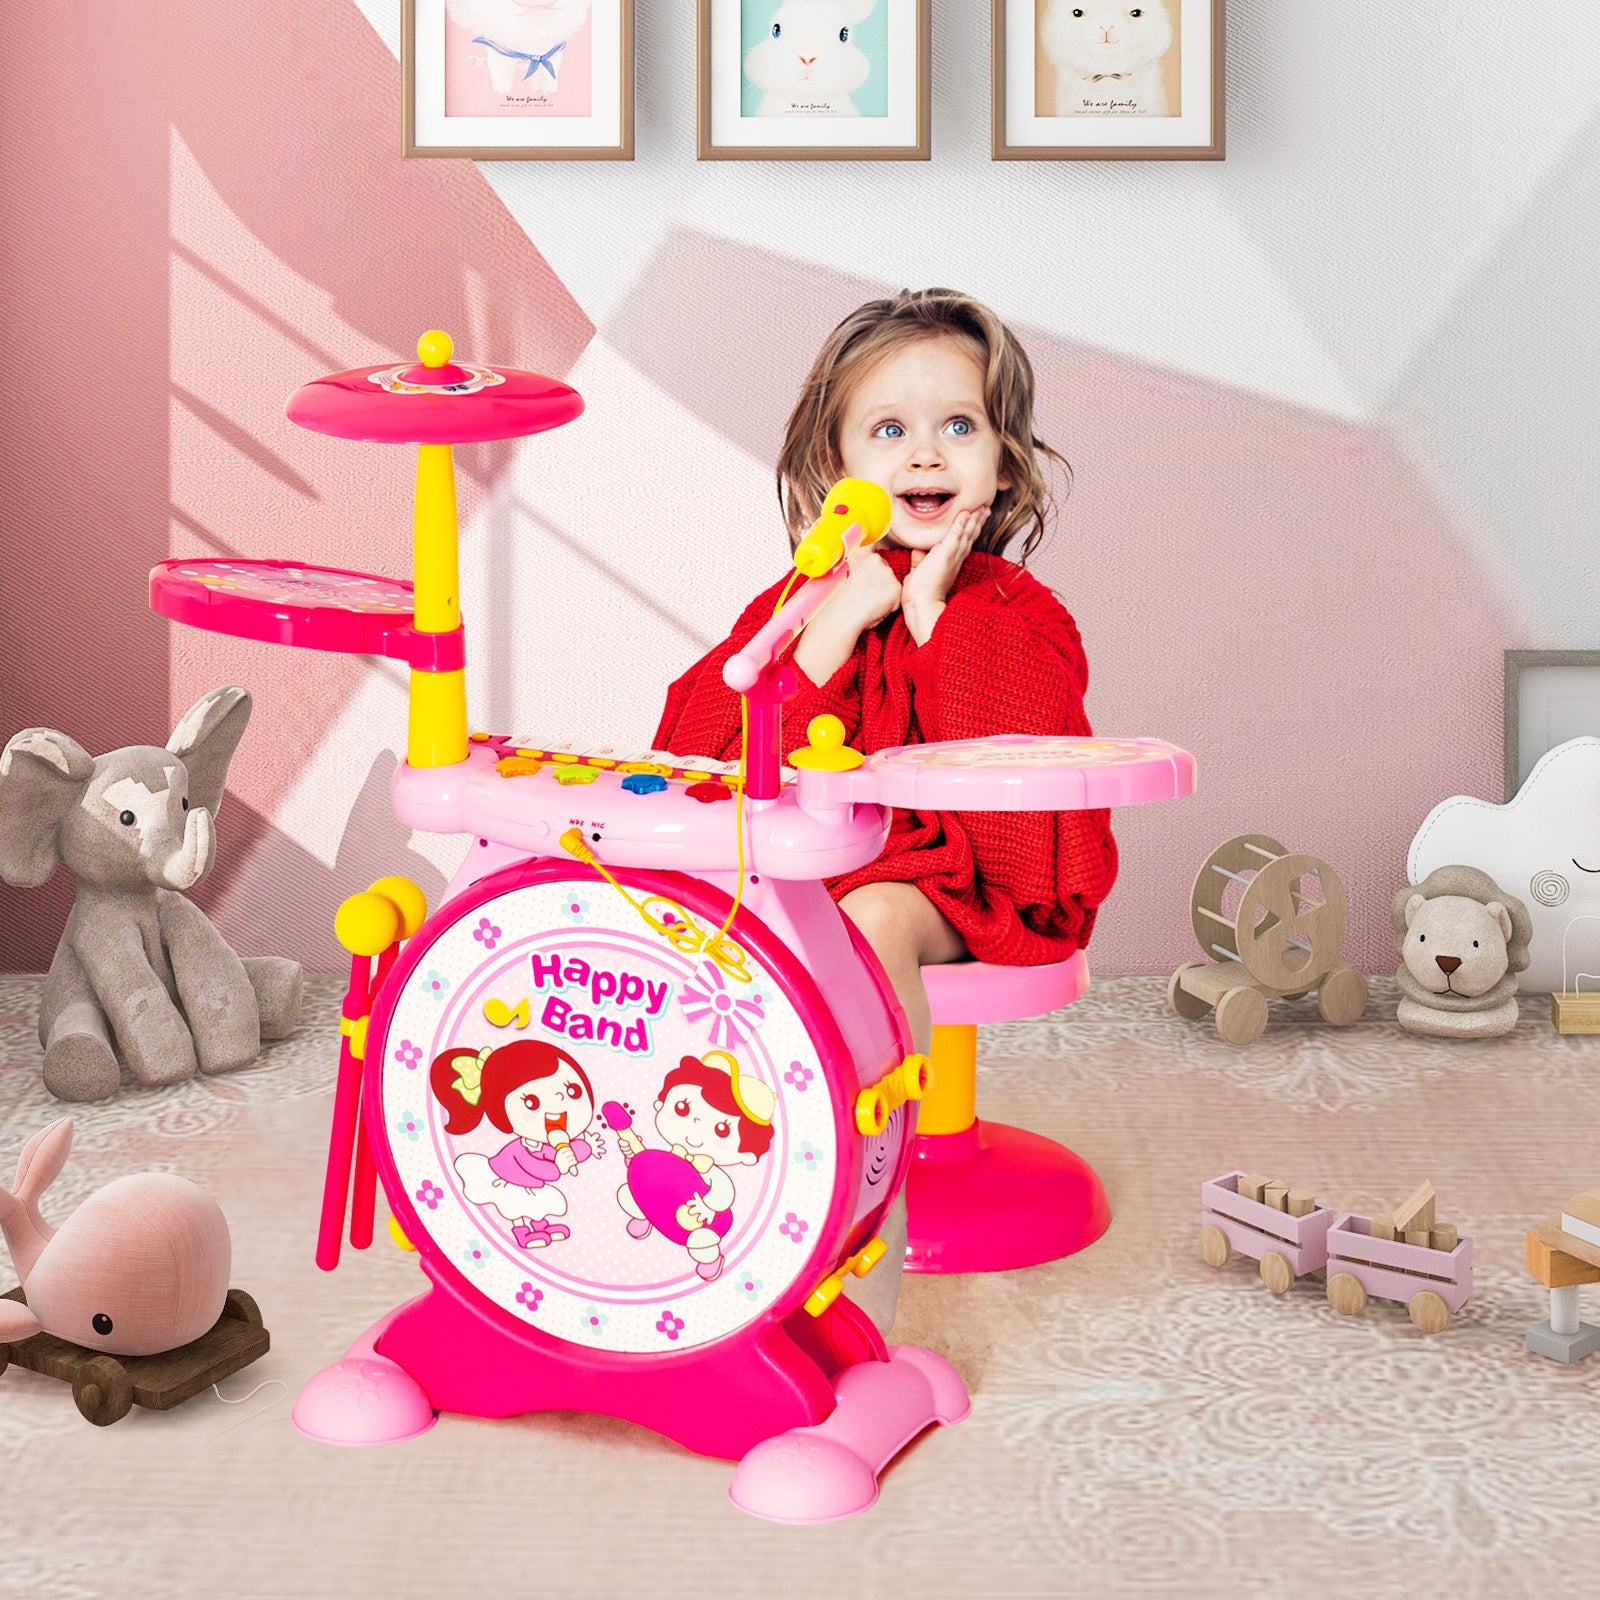 Children's Electronic Drum Kit - 2-in-1 Toy with Keyboard & Microphone in Pink